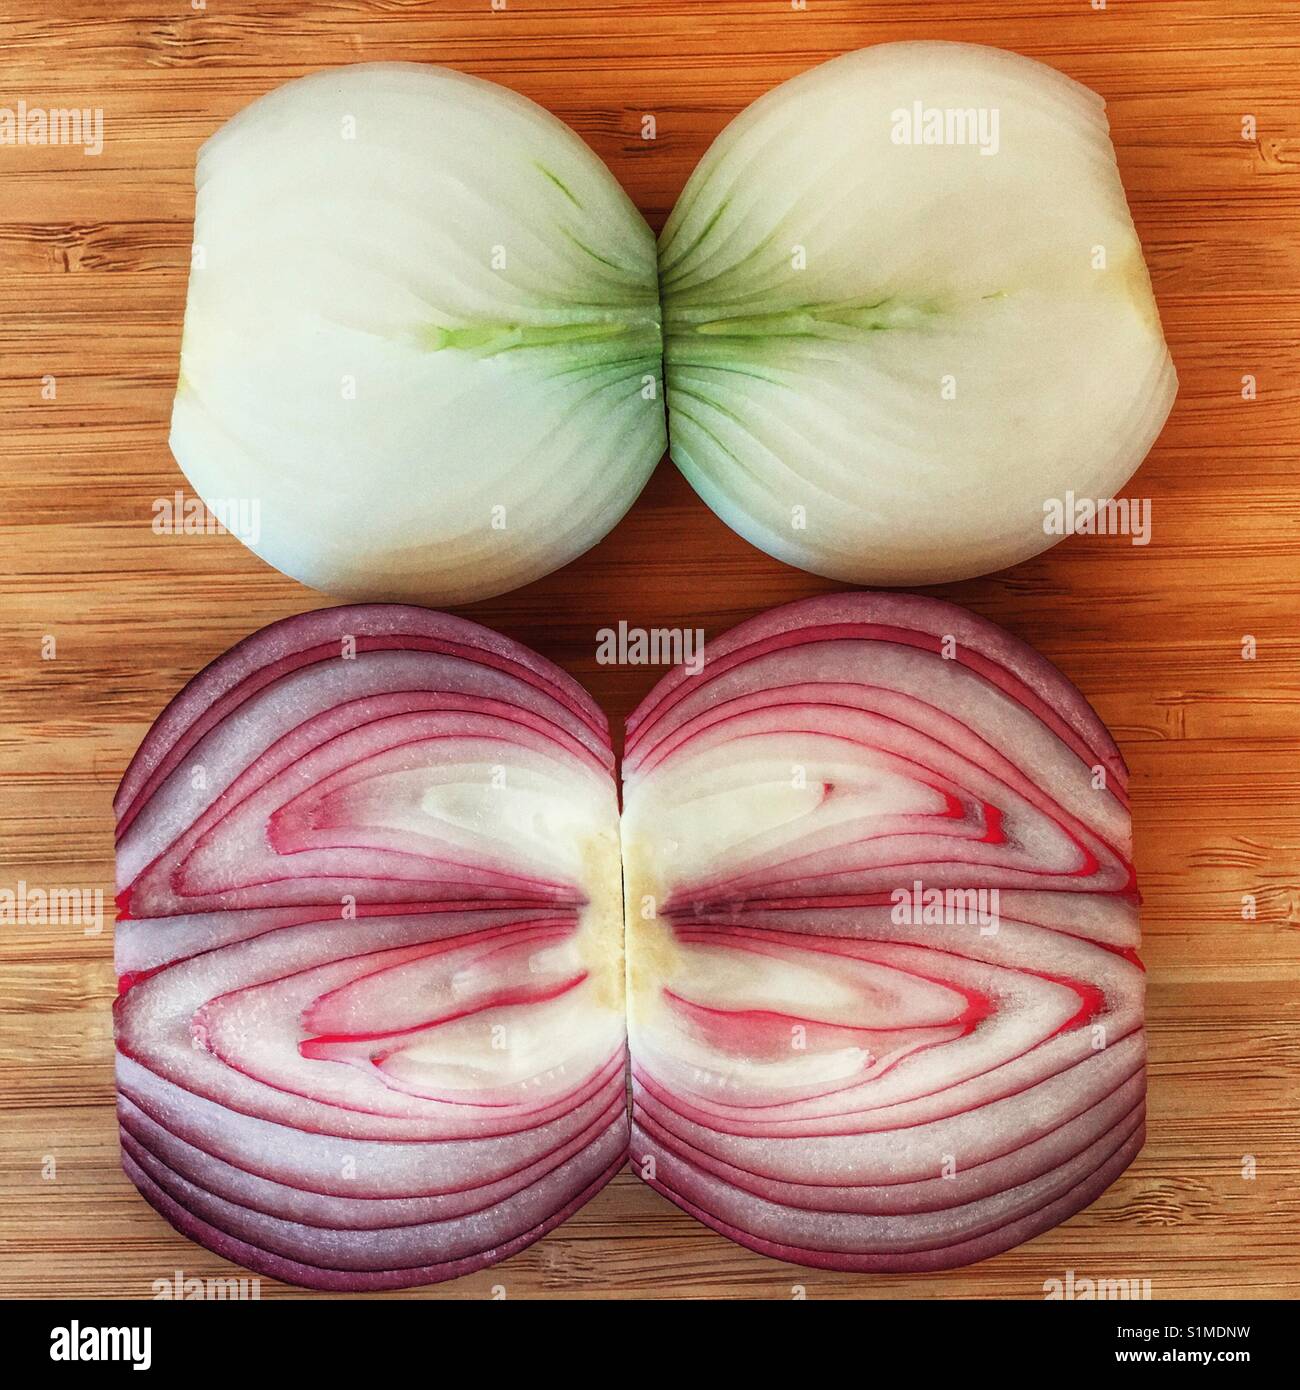 Red onion and white onion, both cut in half Stock Photo